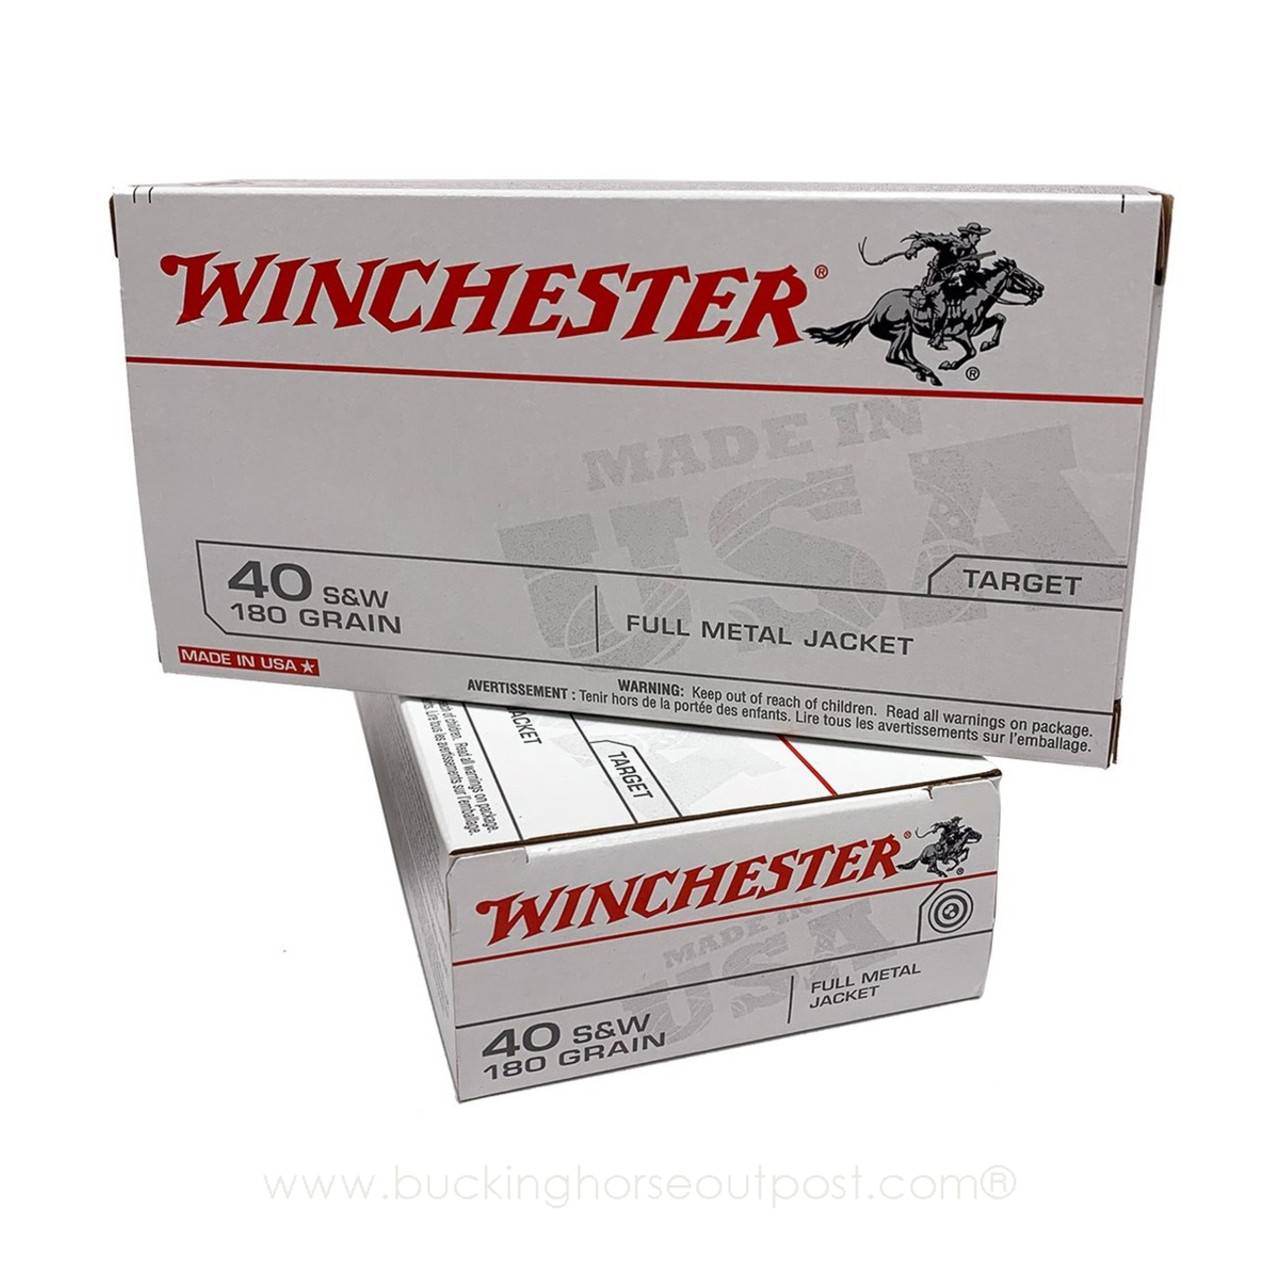 Winchester USA .40 S&W 180 Grain Full Metal Jacket 50rds Per Box (Q4238)- FREE SHIPPING ON ORDERS OVER $175